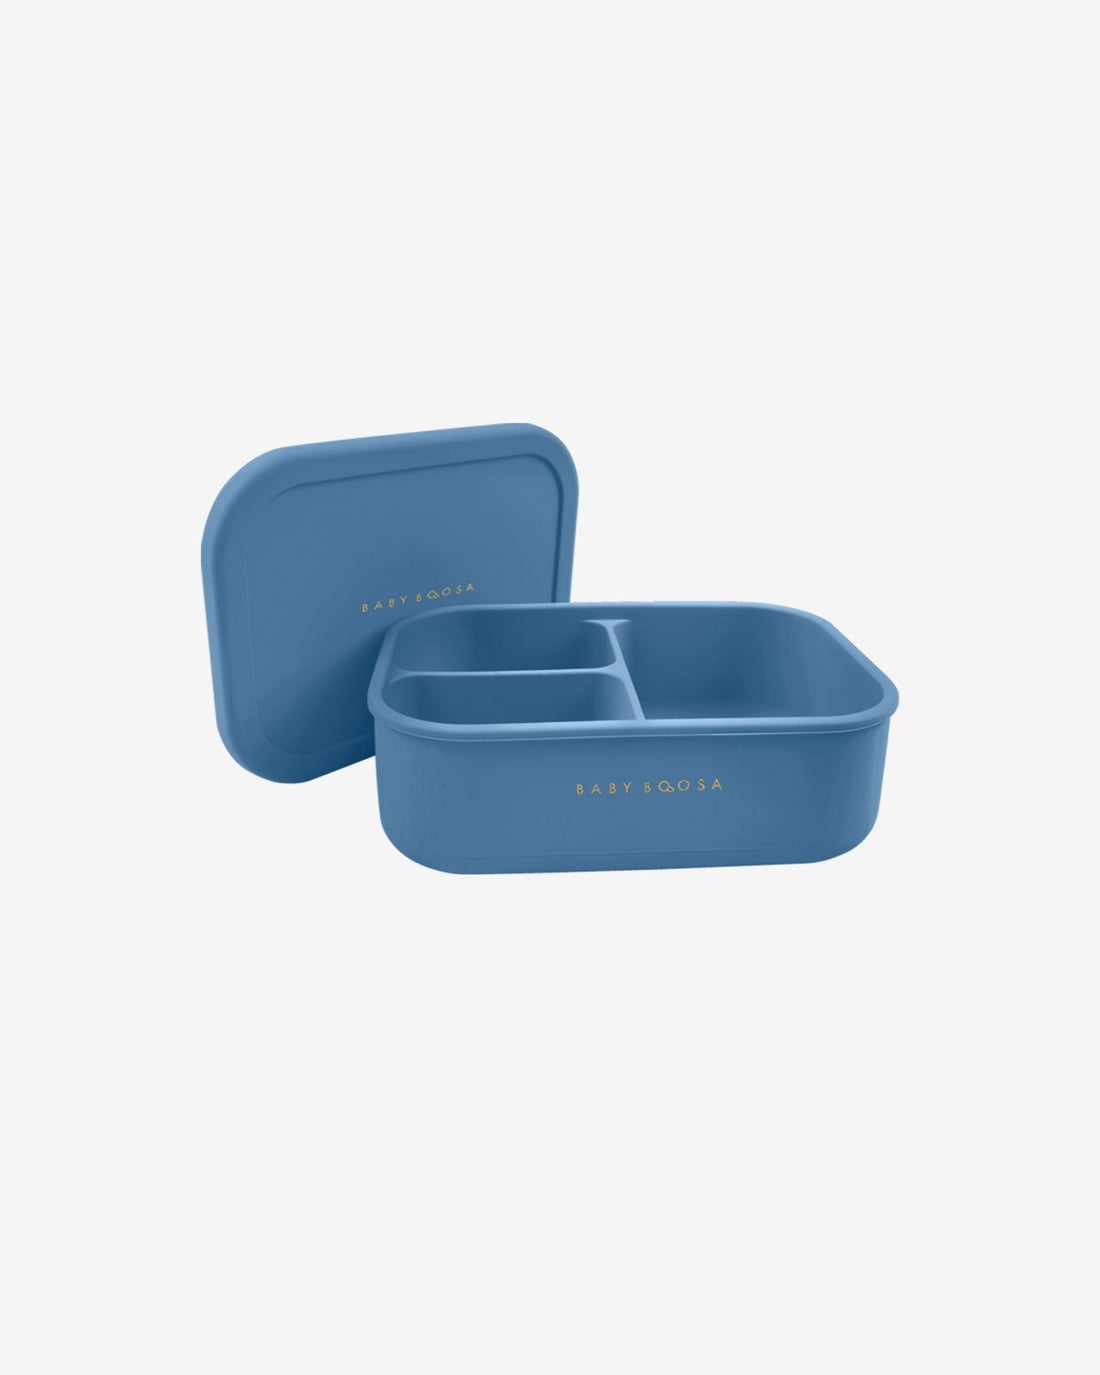 Silicone BrunchieBox™ | Meal Prep | On-the-go (Riviera Blue)